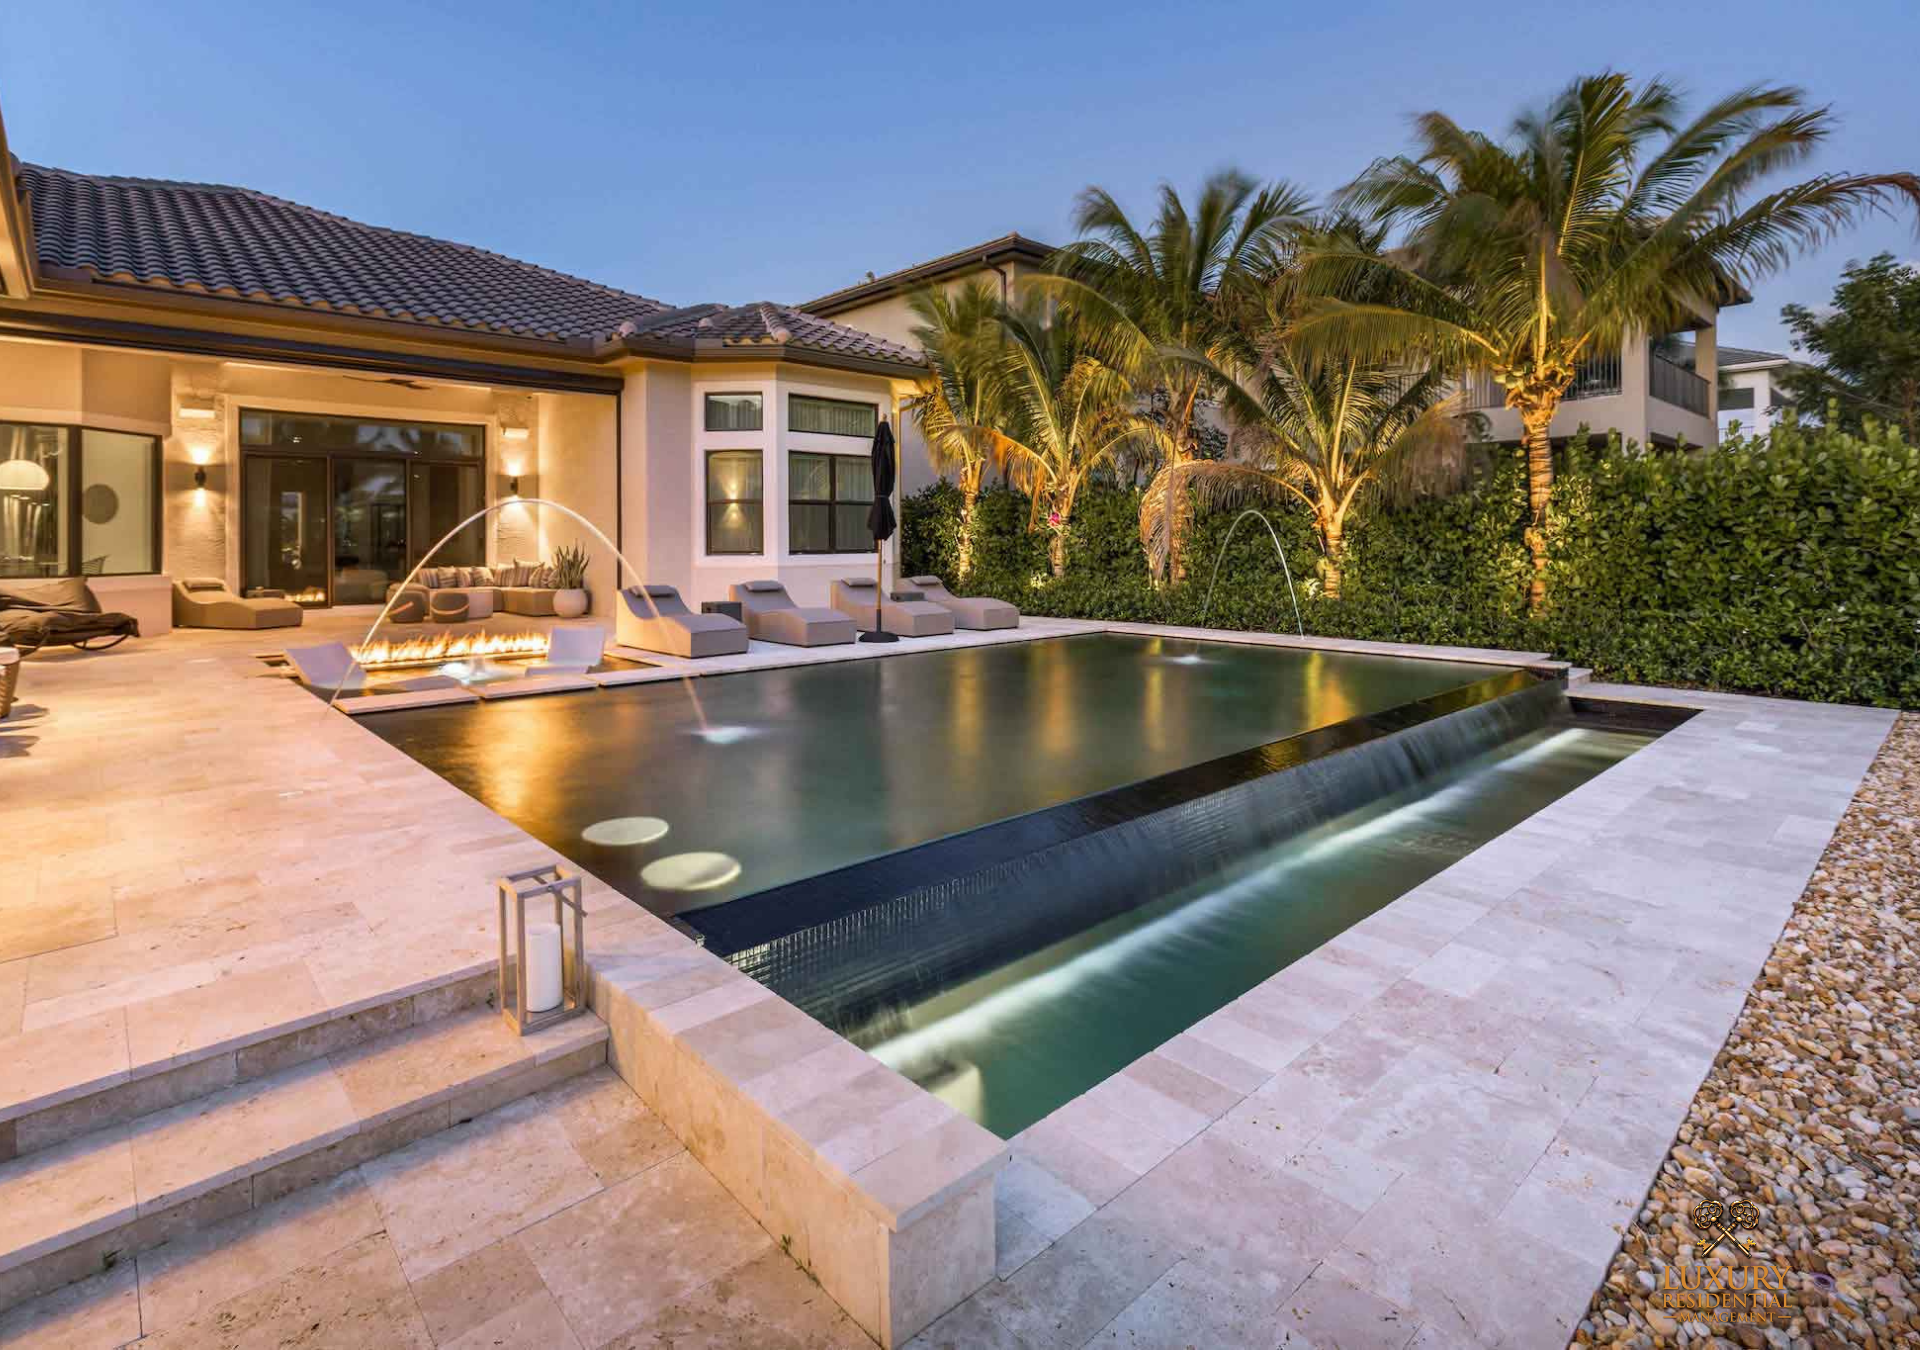 The Top 5 Must-Have Amenities in Miami's Luxury Real Estate Market